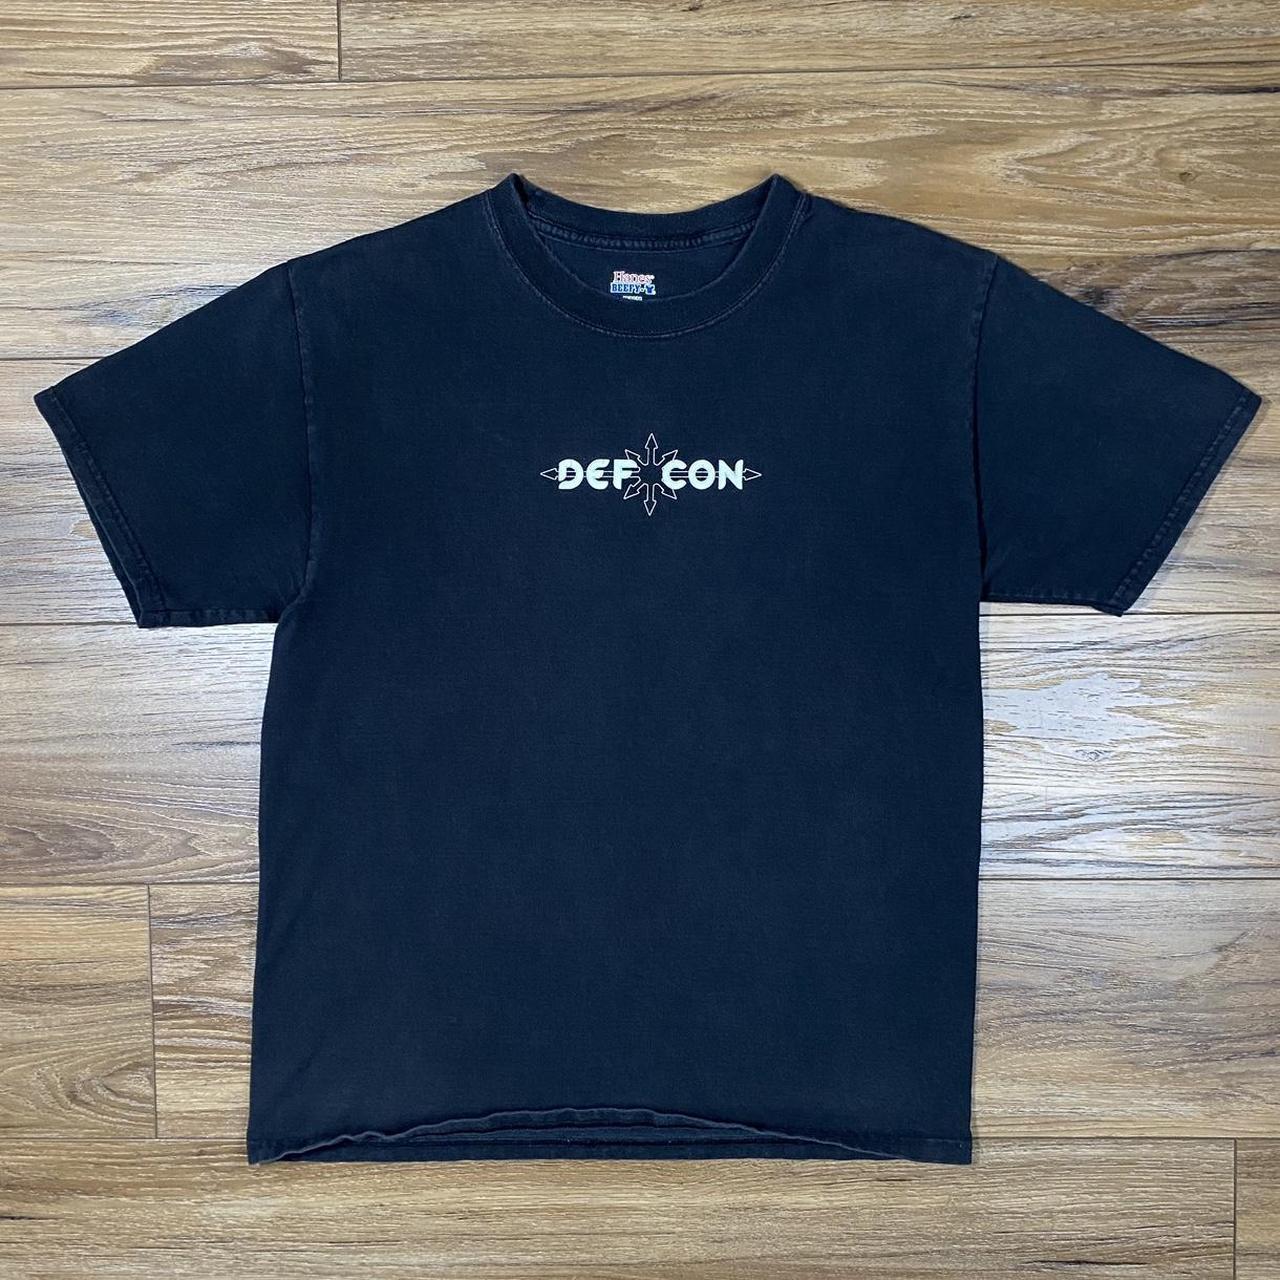 Def Con 23 graphic shirt -see pictures for - Depop